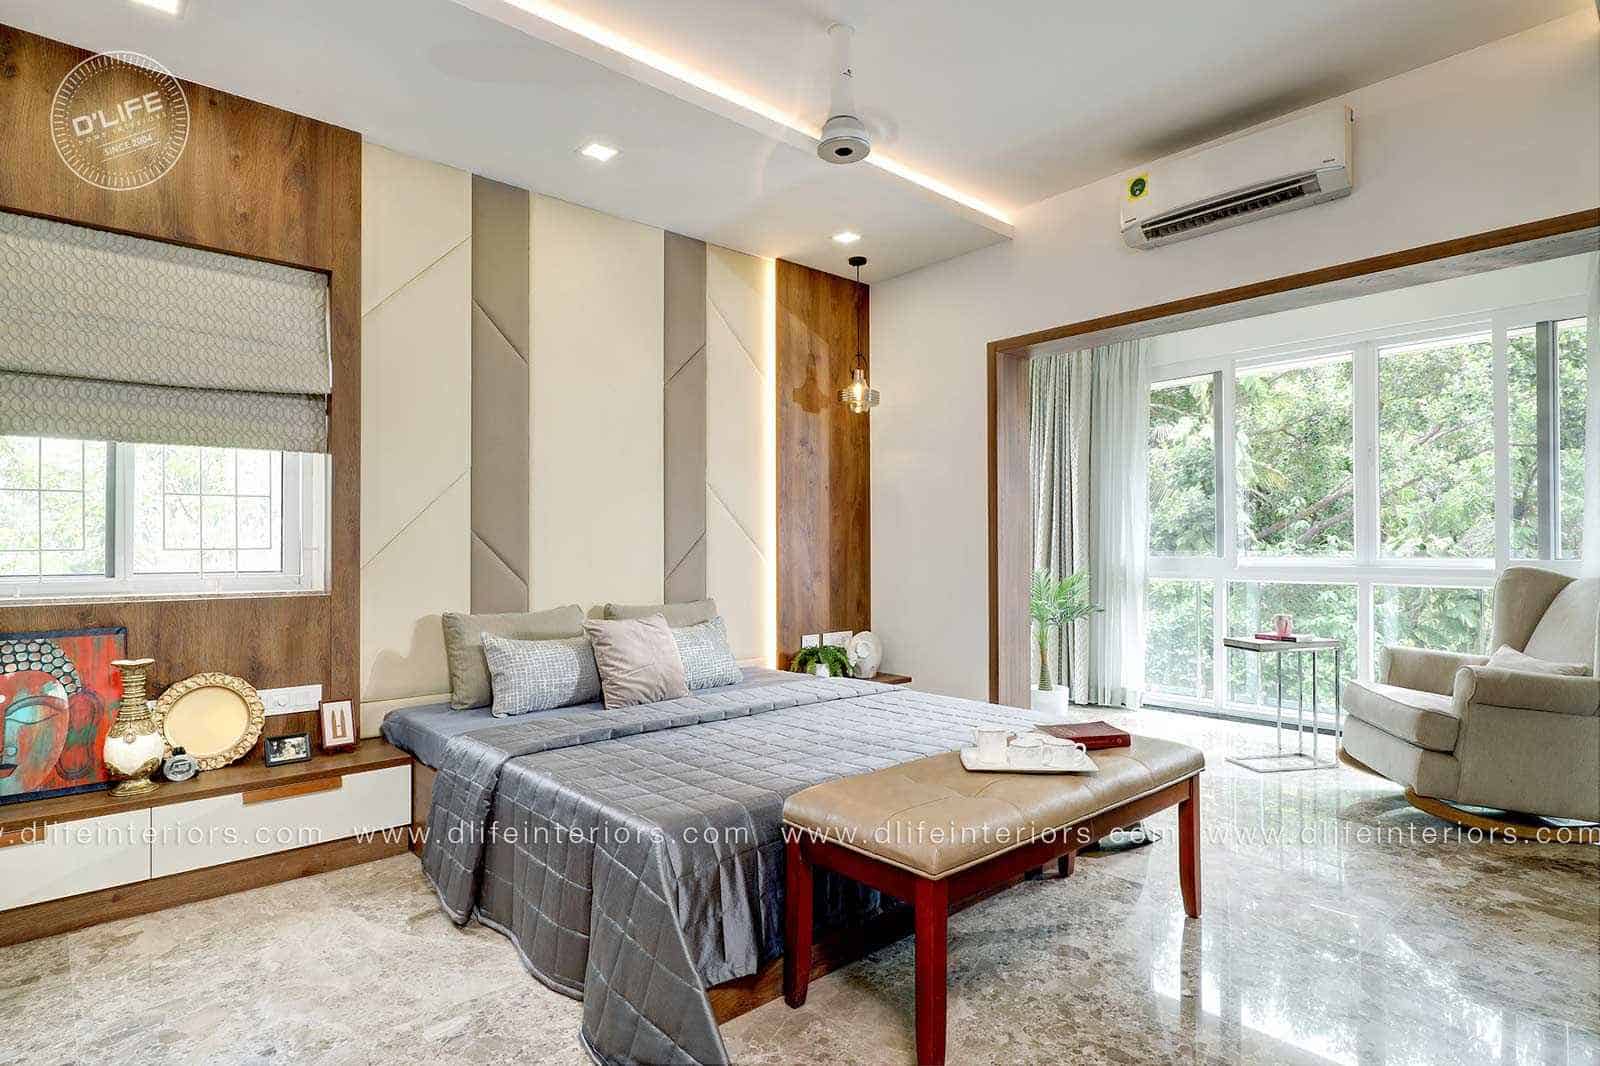 bedroom with a bed, fan, sofa, side table in white and brown and windows